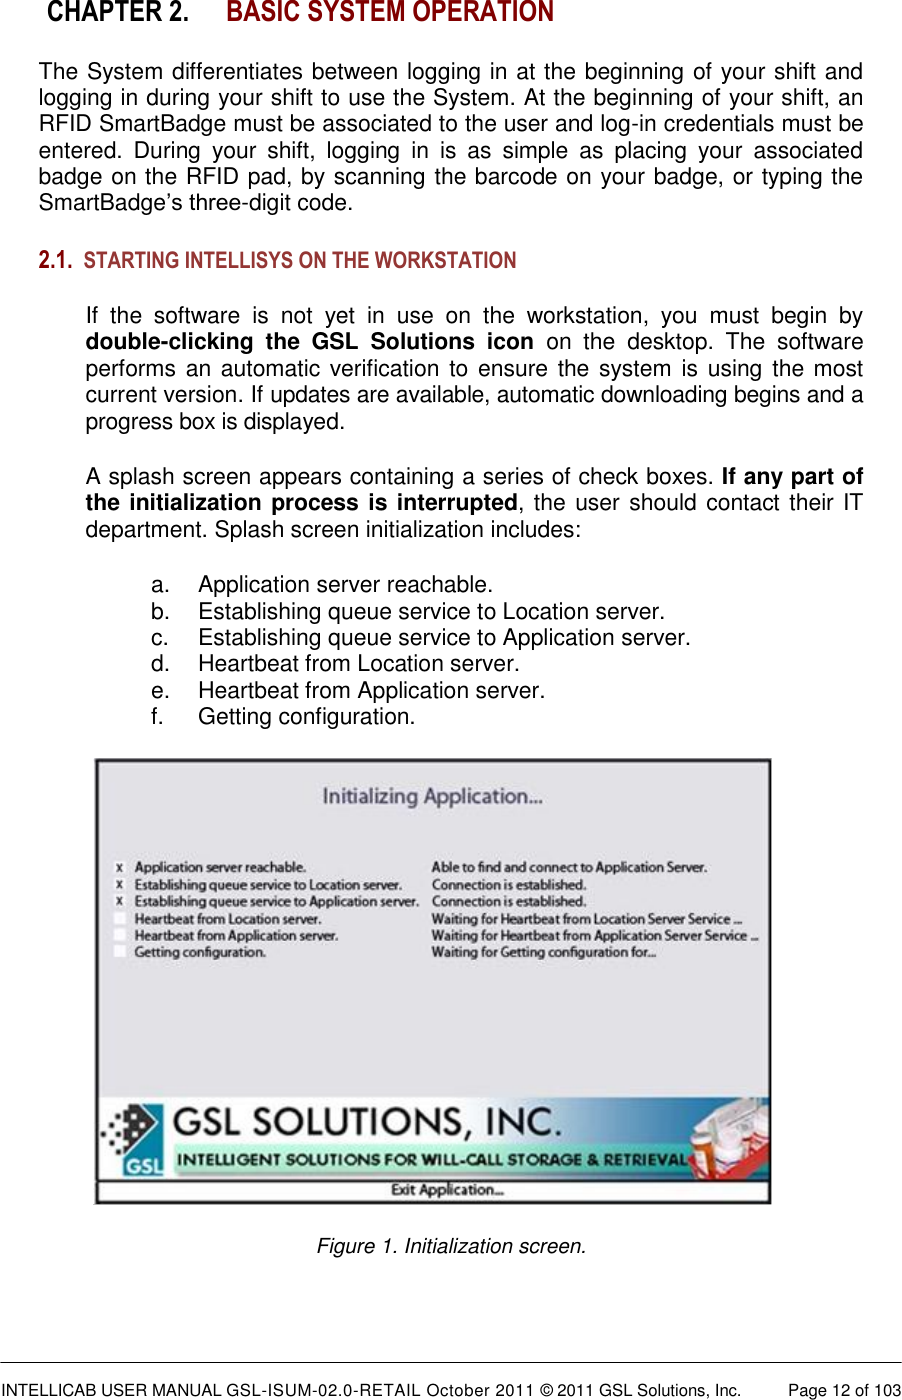  INTELLICAB USER MANUAL GSL-ISUM-02.0-RETAIL October 2011 © 2011 GSL Solutions, Inc.   Page 12 of 103   CHAPTER 2. BASIC SYSTEM OPERATION The System differentiates between logging in at the beginning of your shift and logging in during your shift to use the System. At the beginning of your shift, an RFID SmartBadge must be associated to the user and log-in credentials must be entered.  During  your  shift,  logging  in  is  as  simple  as  placing  your  associated badge on the RFID pad, by scanning the barcode on your badge, or typing the SmartBadge’s three-digit code. 2.1. STARTING INTELLISYS ON THE WORKSTATION  If  the  software  is  not  yet  in  use  on  the  workstation,  you  must  begin  by double-clicking  the  GSL  Solutions  icon  on  the  desktop.  The  software performs an automatic verification  to  ensure the system is using the most current version. If updates are available, automatic downloading begins and a progress box is displayed. A splash screen appears containing a series of check boxes. If any part of the initialization process is interrupted, the user should contact their IT department. Splash screen initialization includes: a.  Application server reachable. b.  Establishing queue service to Location server. c.  Establishing queue service to Application server. d.  Heartbeat from Location server. e.  Heartbeat from Application server. f.  Getting configuration.  Figure 1. Initialization screen.  